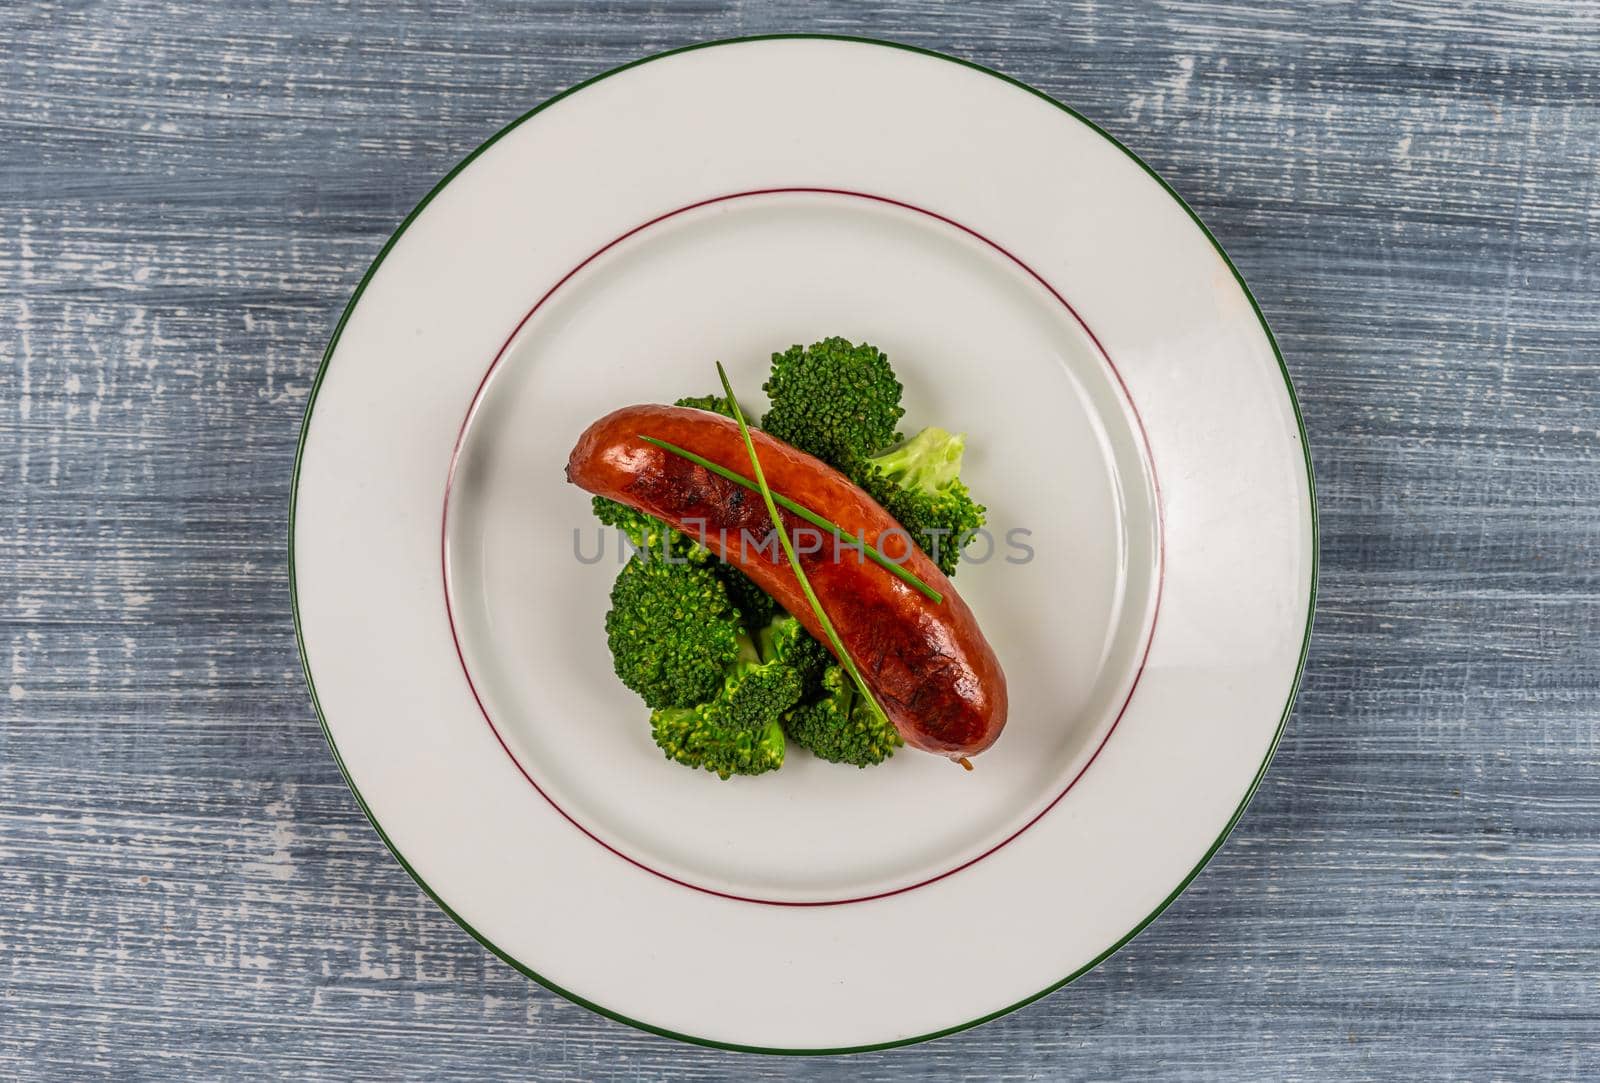 French sausage from Montbeliard seen from above minimalist image by JPC-PROD